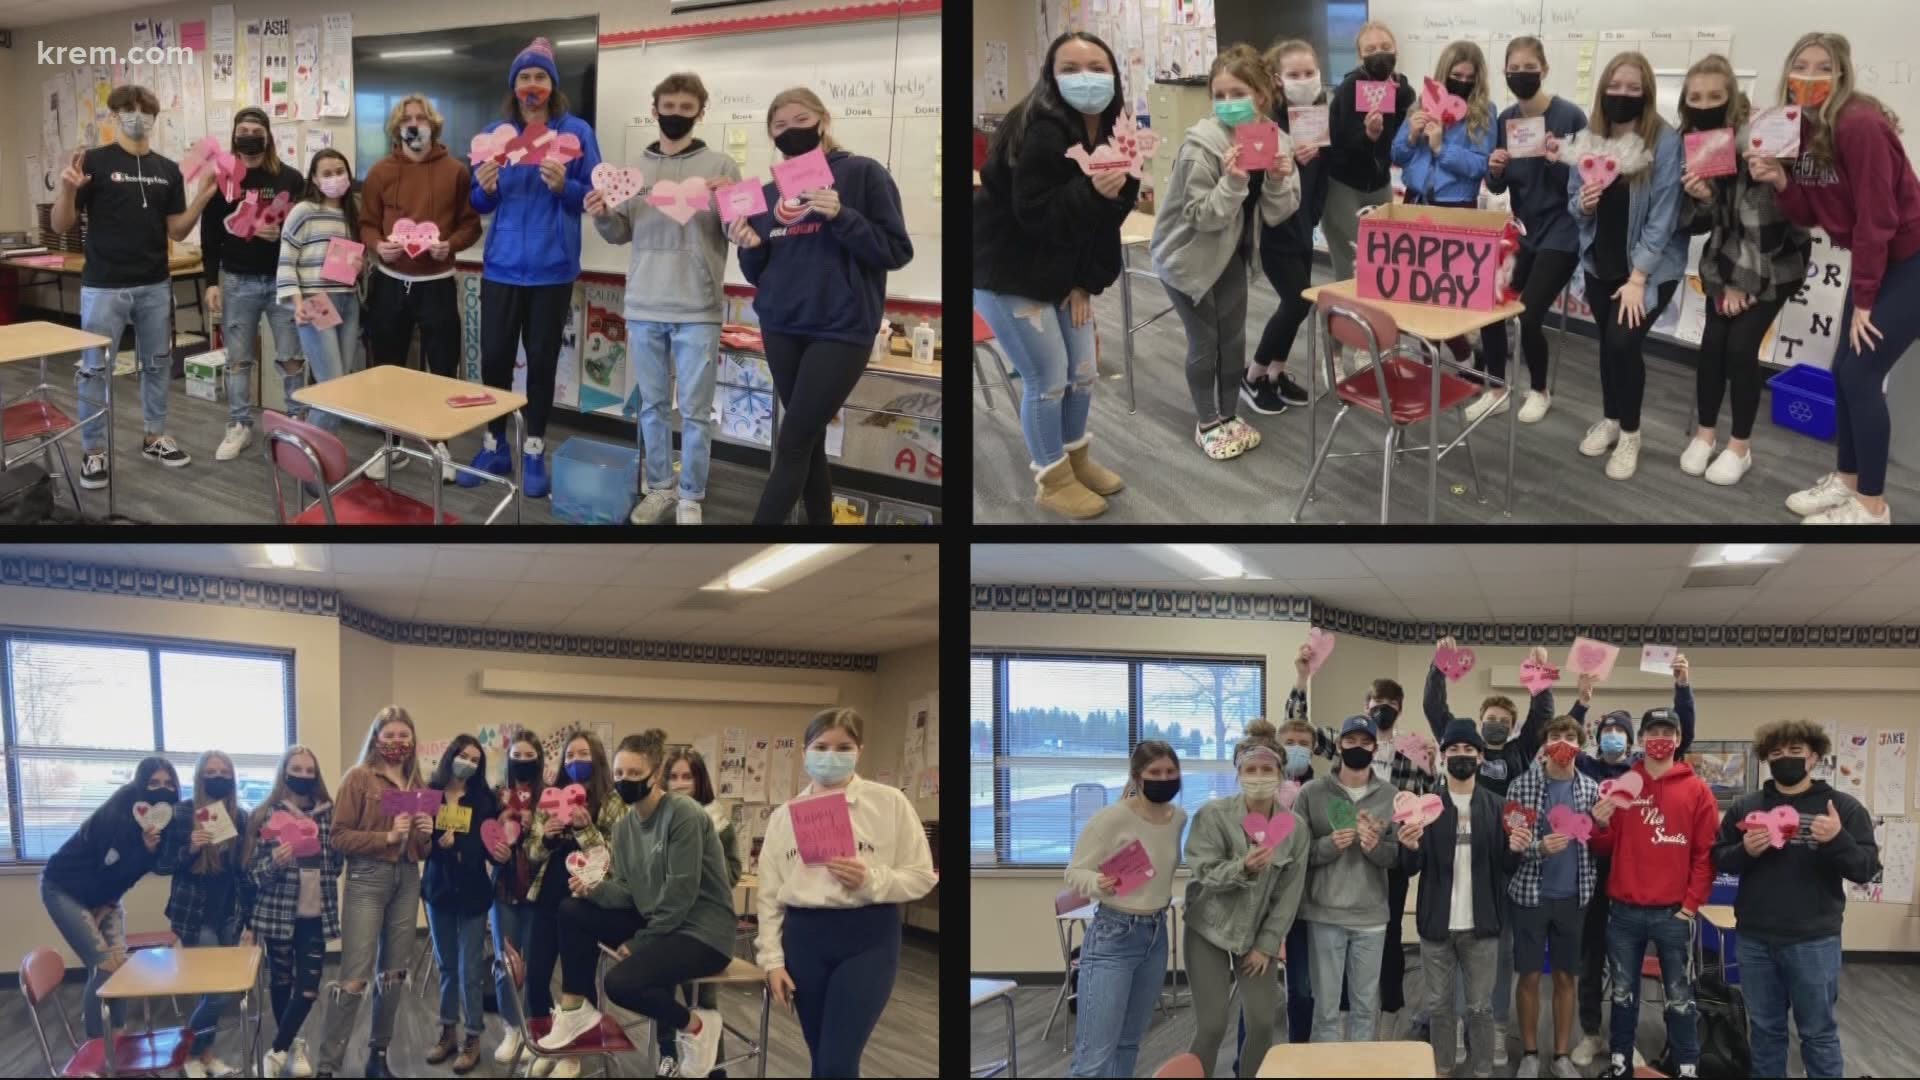 The leadership class made dozens of cards to help the residents cope with isolation during the COVID-19 pandemic.